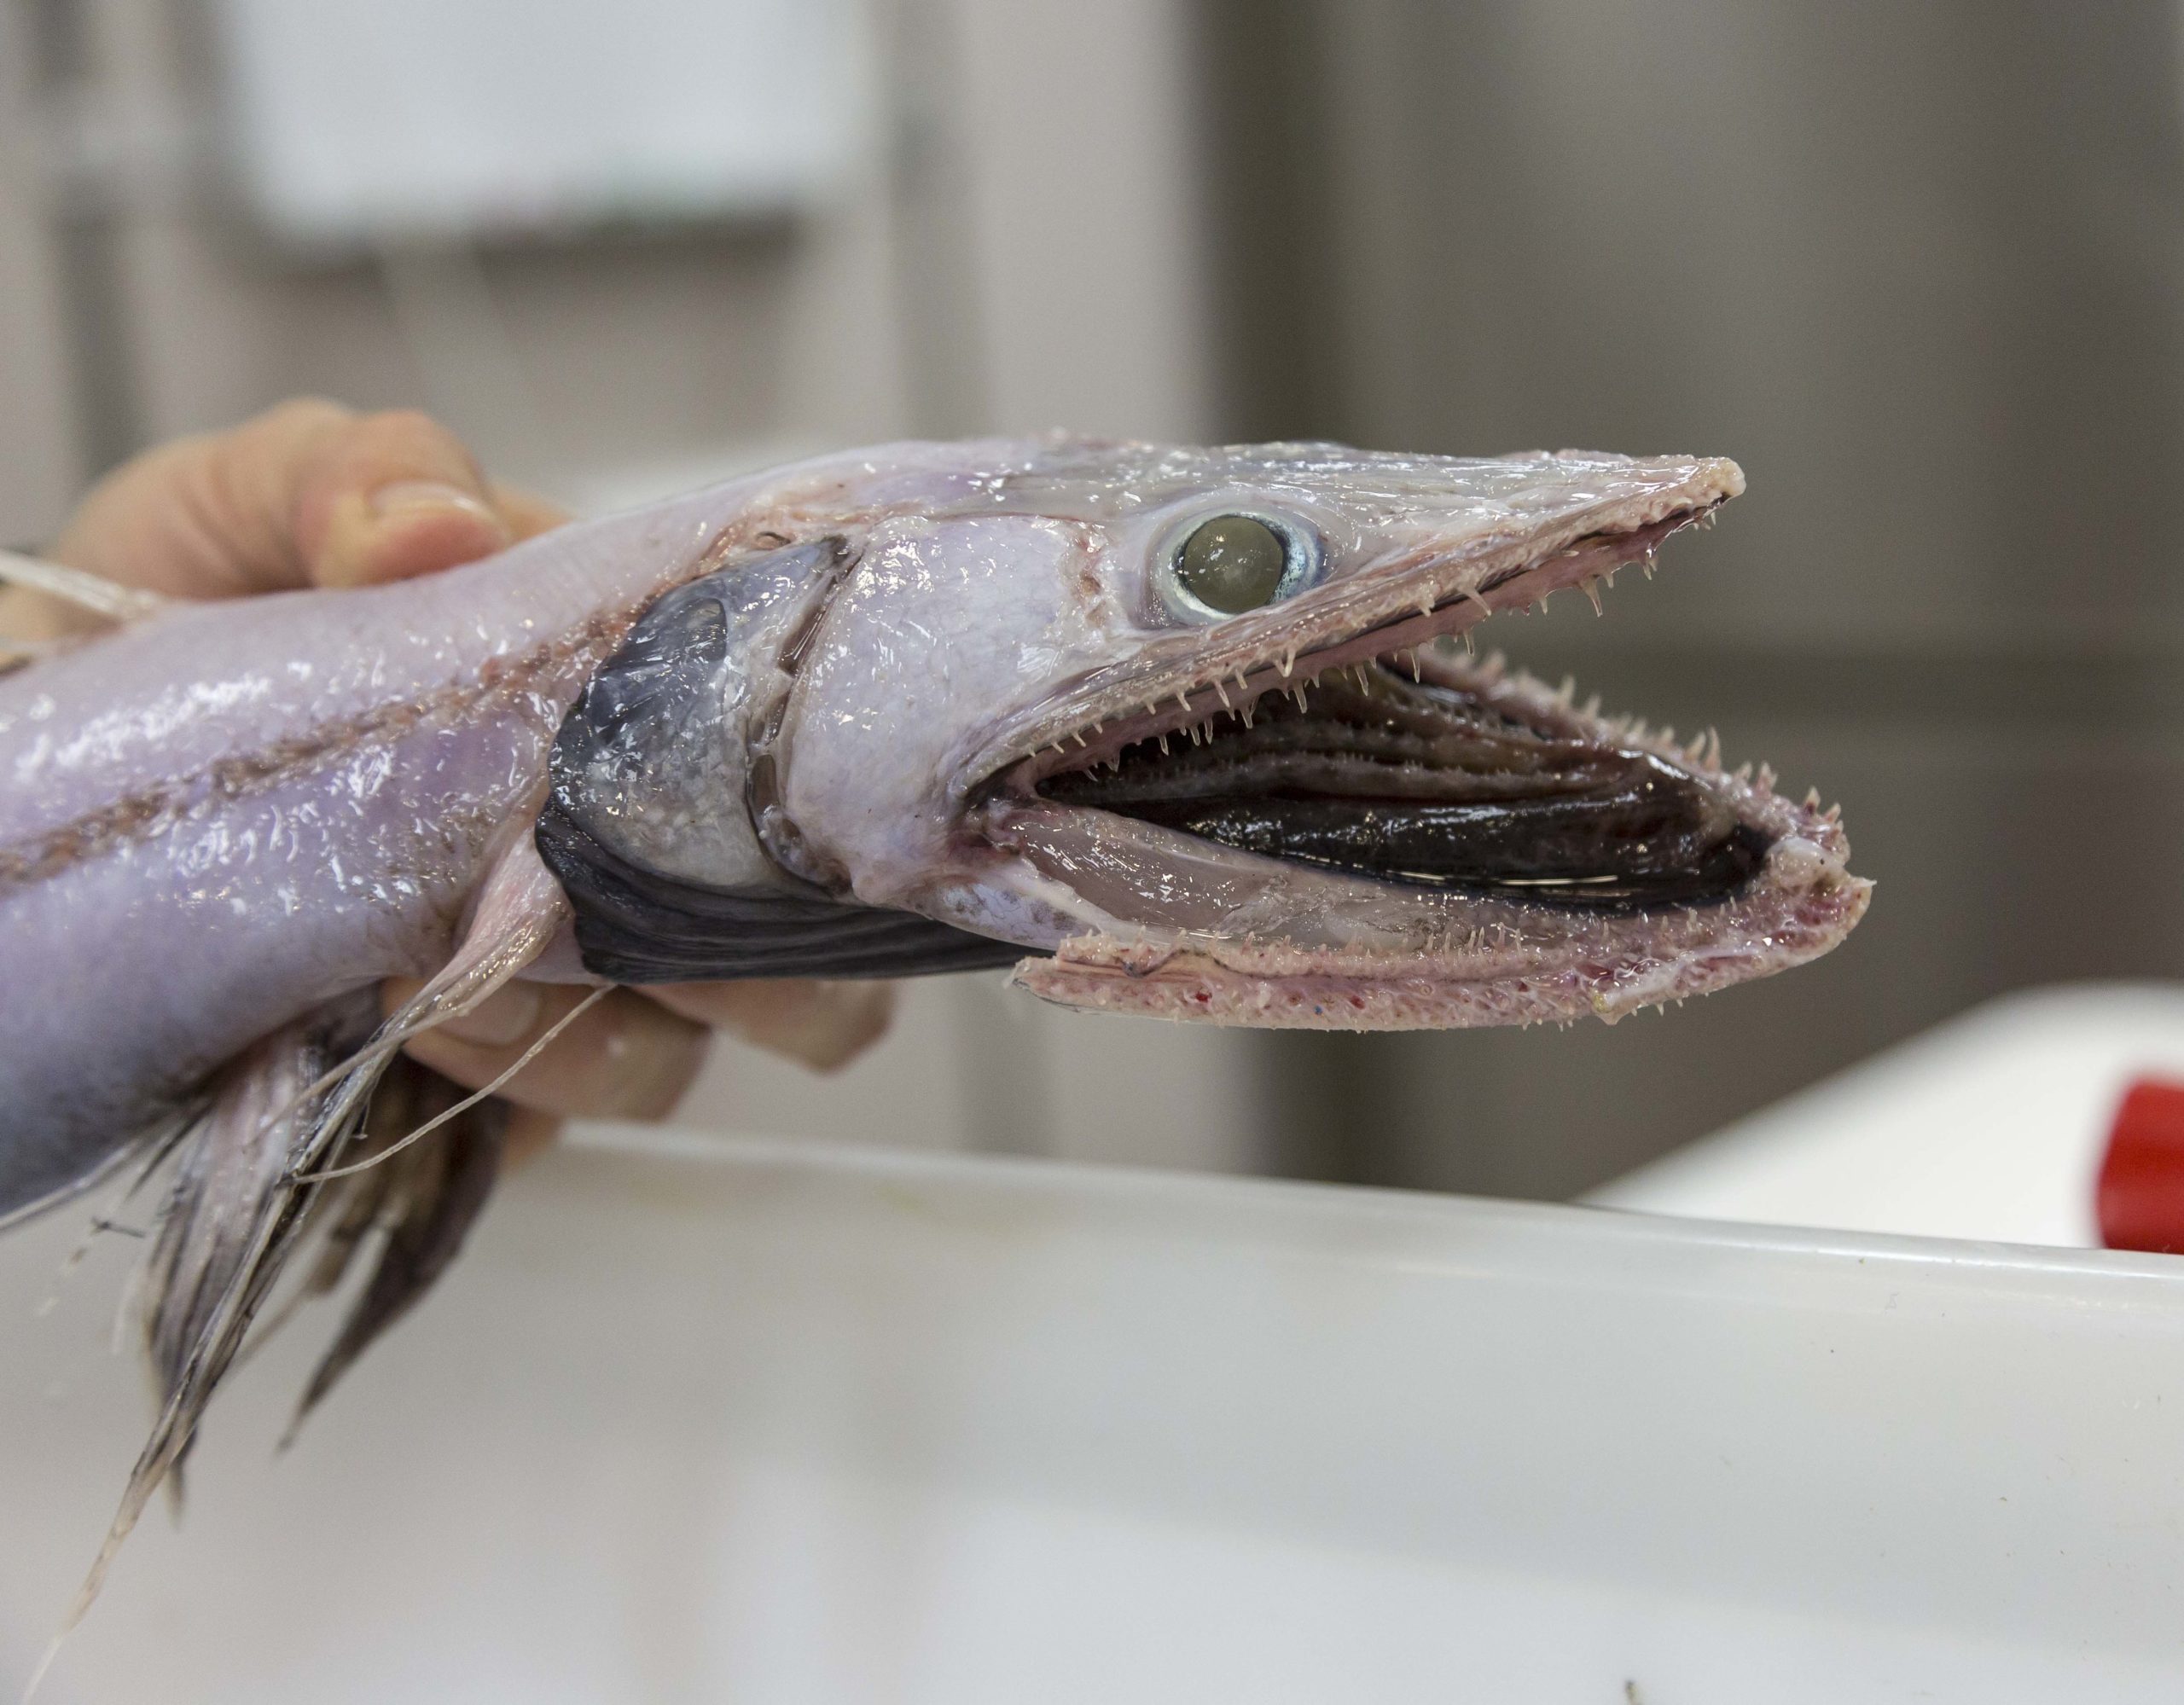 Hand holding the front part a purplish coloured elongated fish showing large mouth with needle-like teeth.